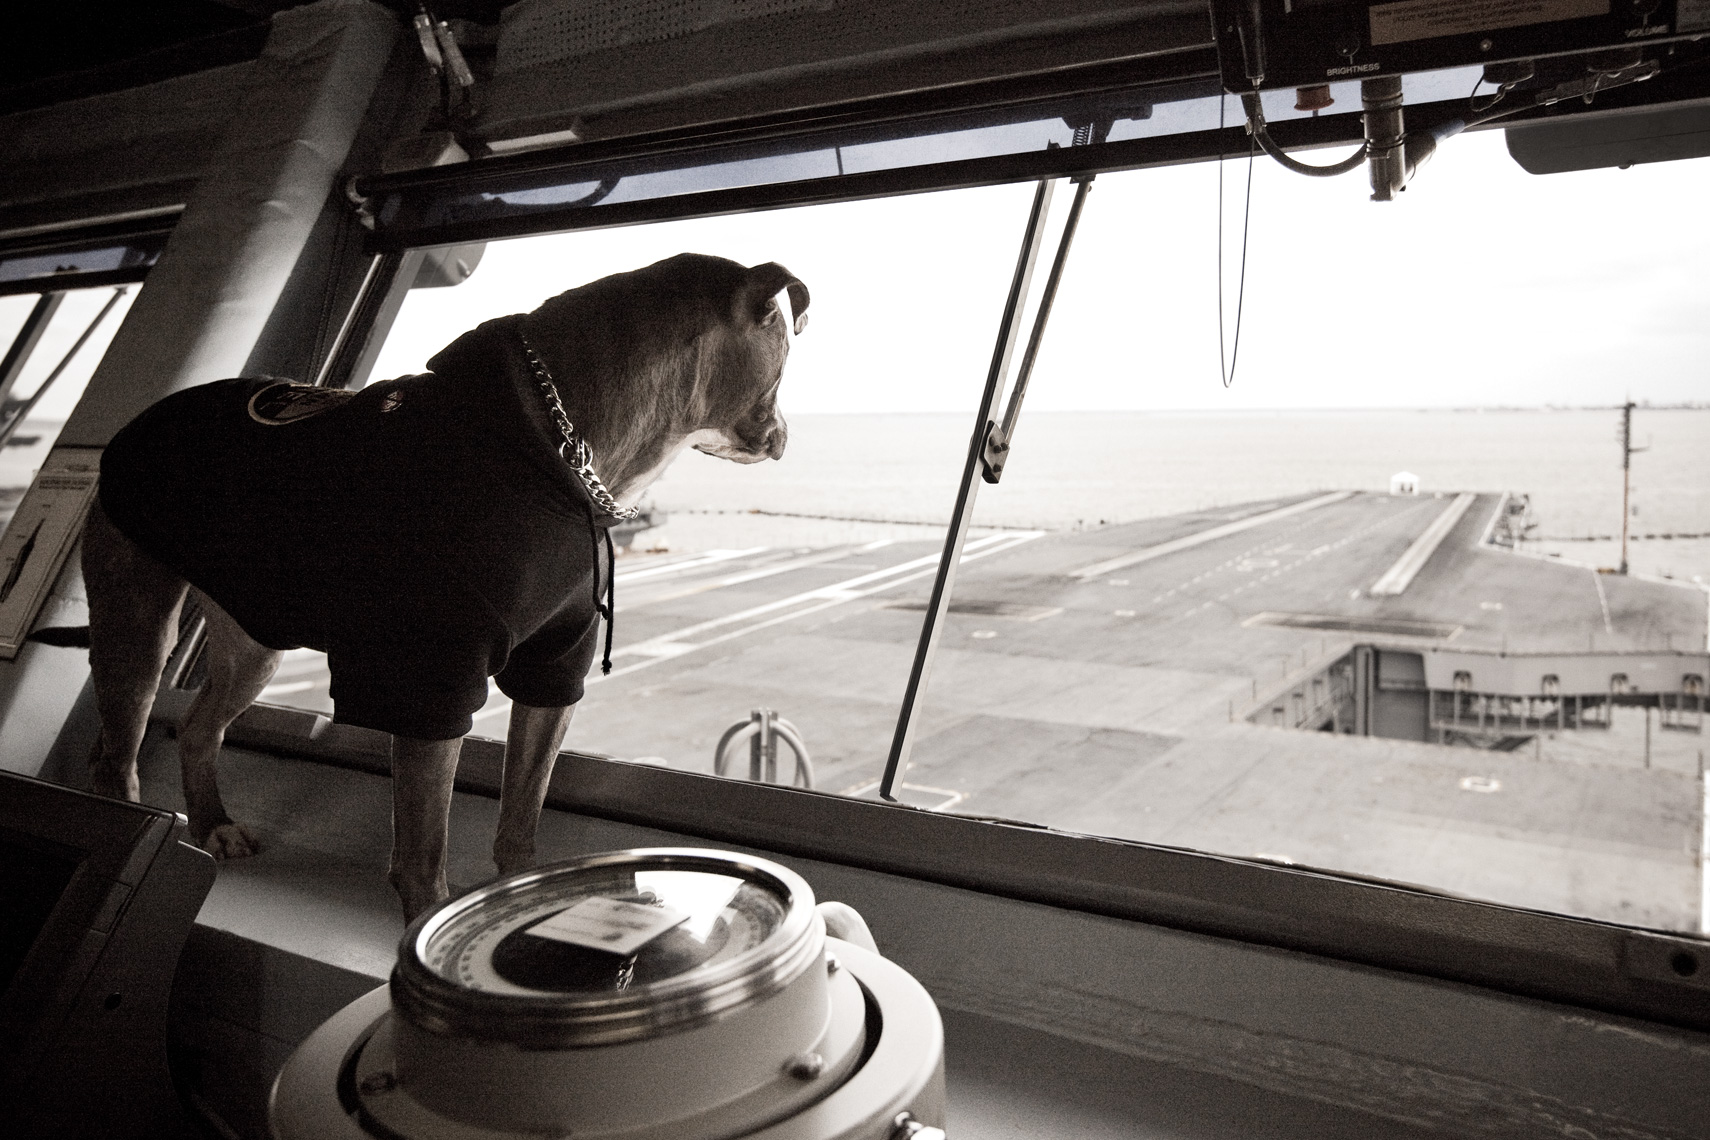 Los Angeles Dog Photography, Michael Brian, Pit Bull on USS George HW Bush, Blue Nose, Kasha Fierce on nuclear-powered aircraft carrier